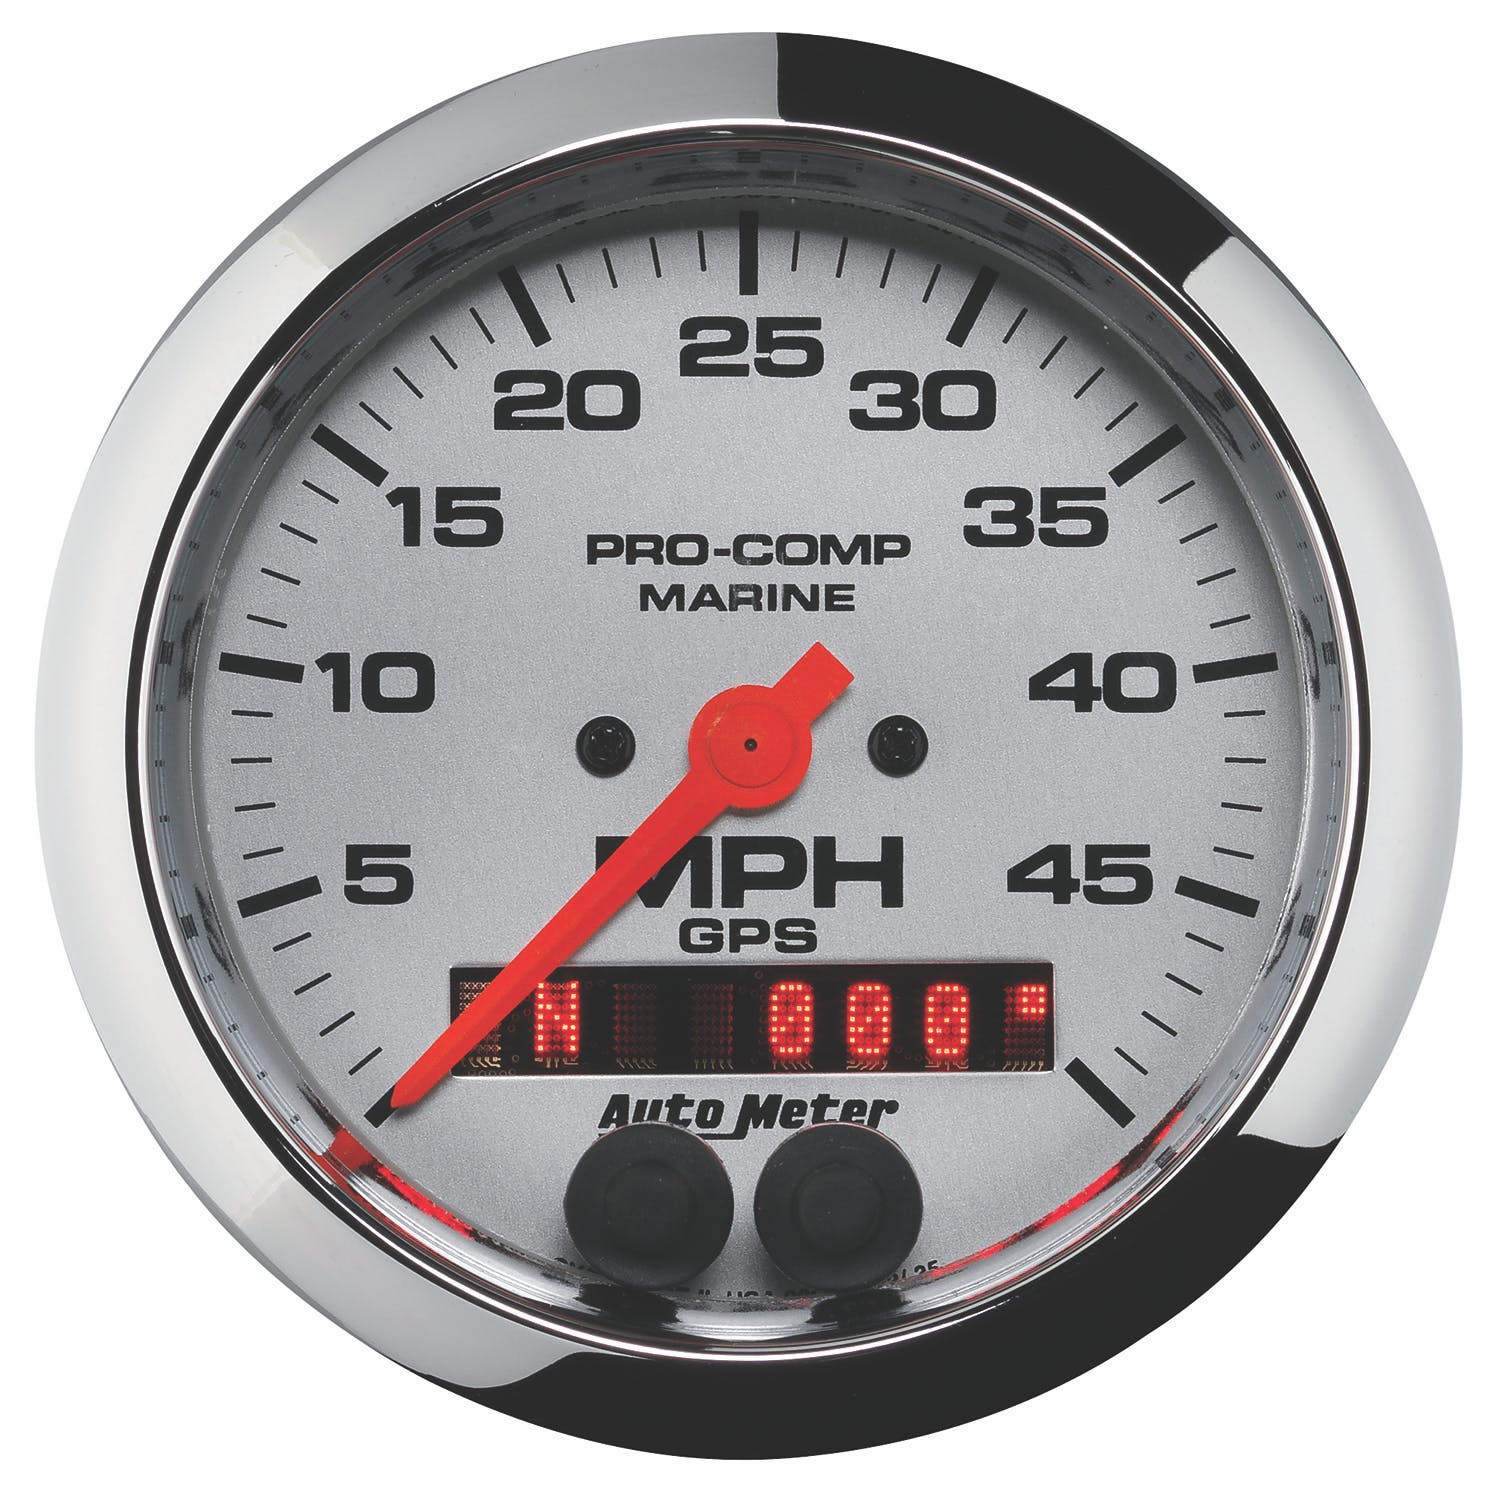 AutoMeter Products 200635-35 Speedometer Gauge, Marine Chrome, 3 3/8, 50MPH, GPS